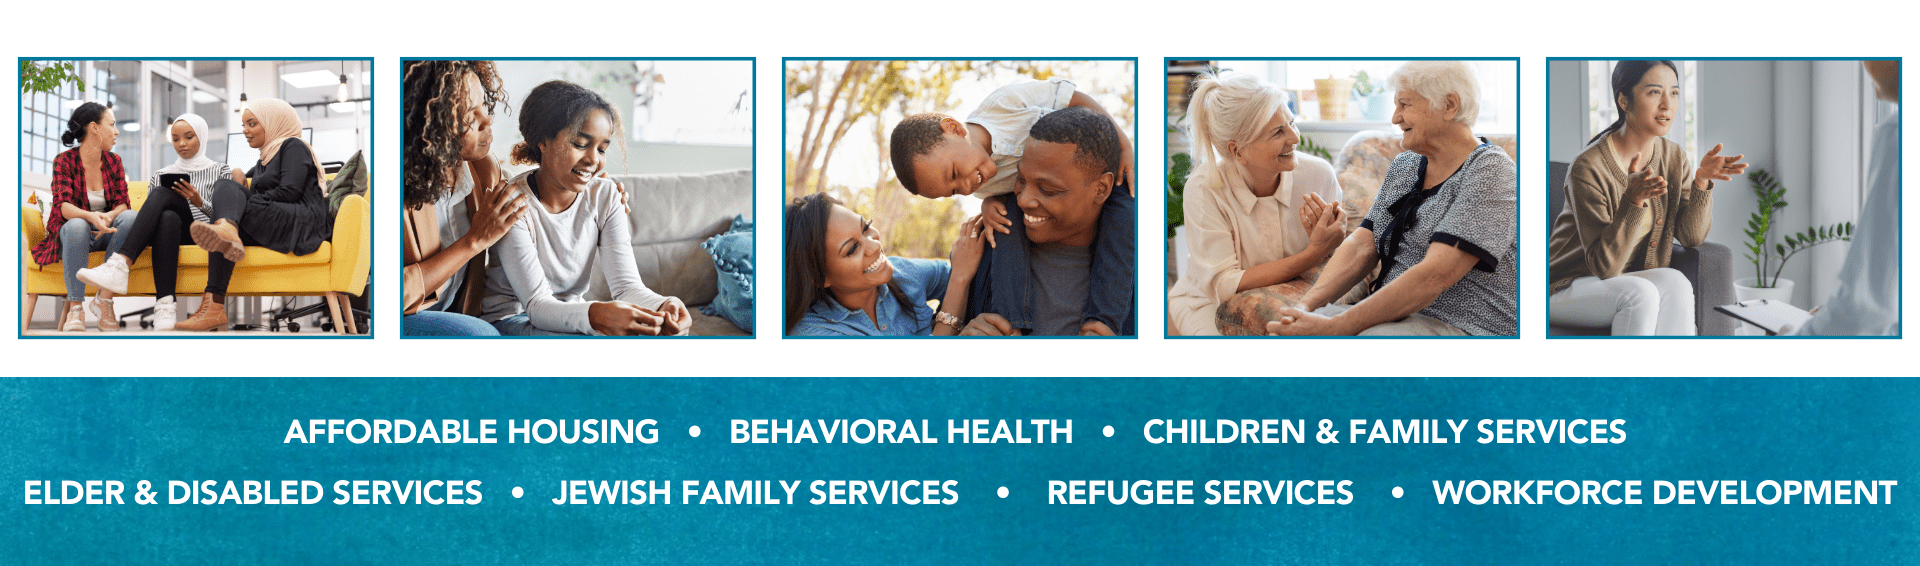 AFFORDABLE HOUSING • BEHAVIORAL HEALTH • CHILDREN & FAMILY SERVICES<br />
ELDER & DISABLED SERVICES • JEWISH FAMILY SERVICES • REFUGEE SERVICES • WORKFORCE DEVELOPMENT with photos of people illustrating the pillars